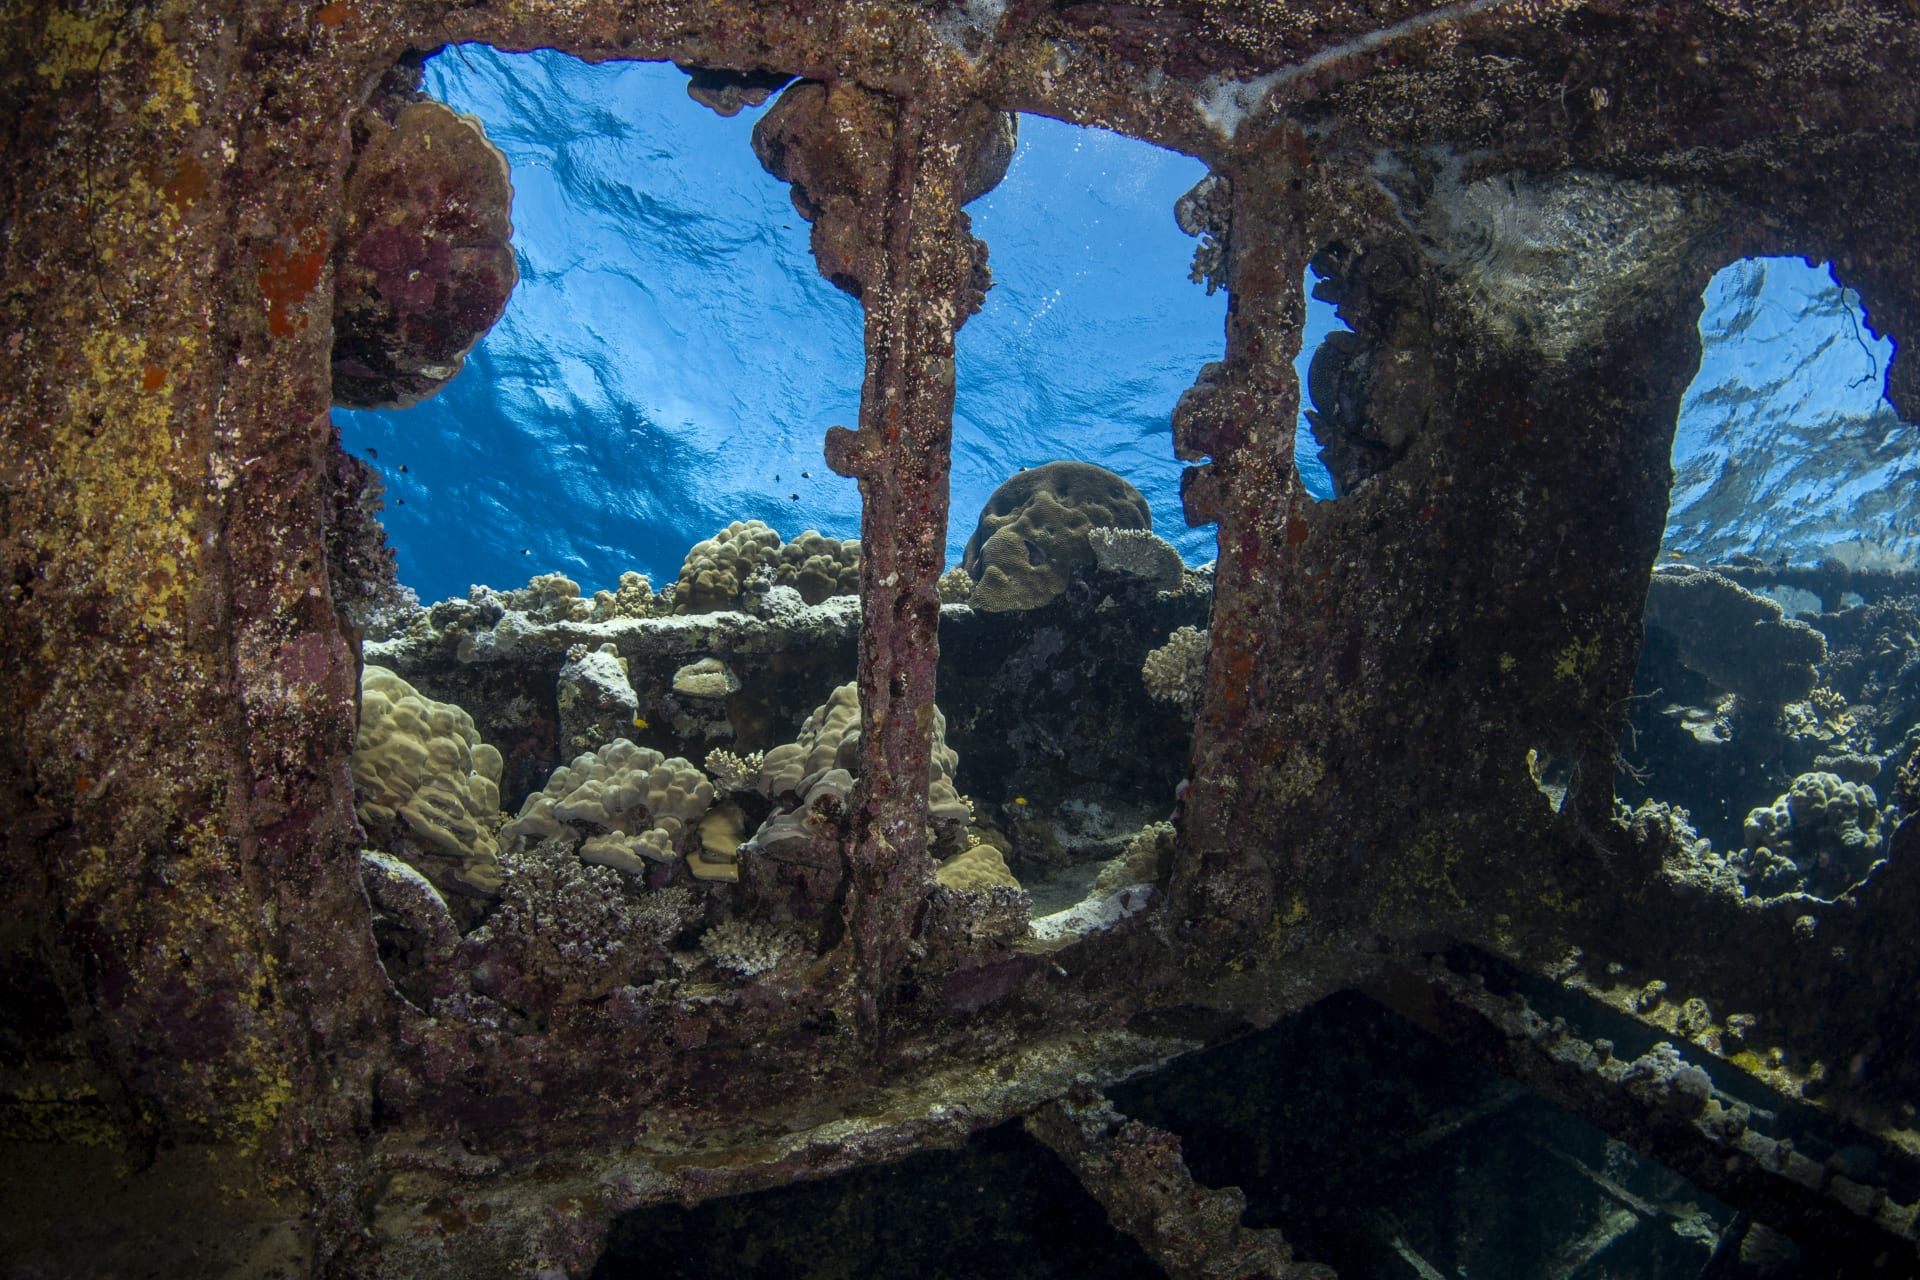 With a mysterious history, a wreck turns into a charming destination for divers in the depths of the Red Sea in Egypt